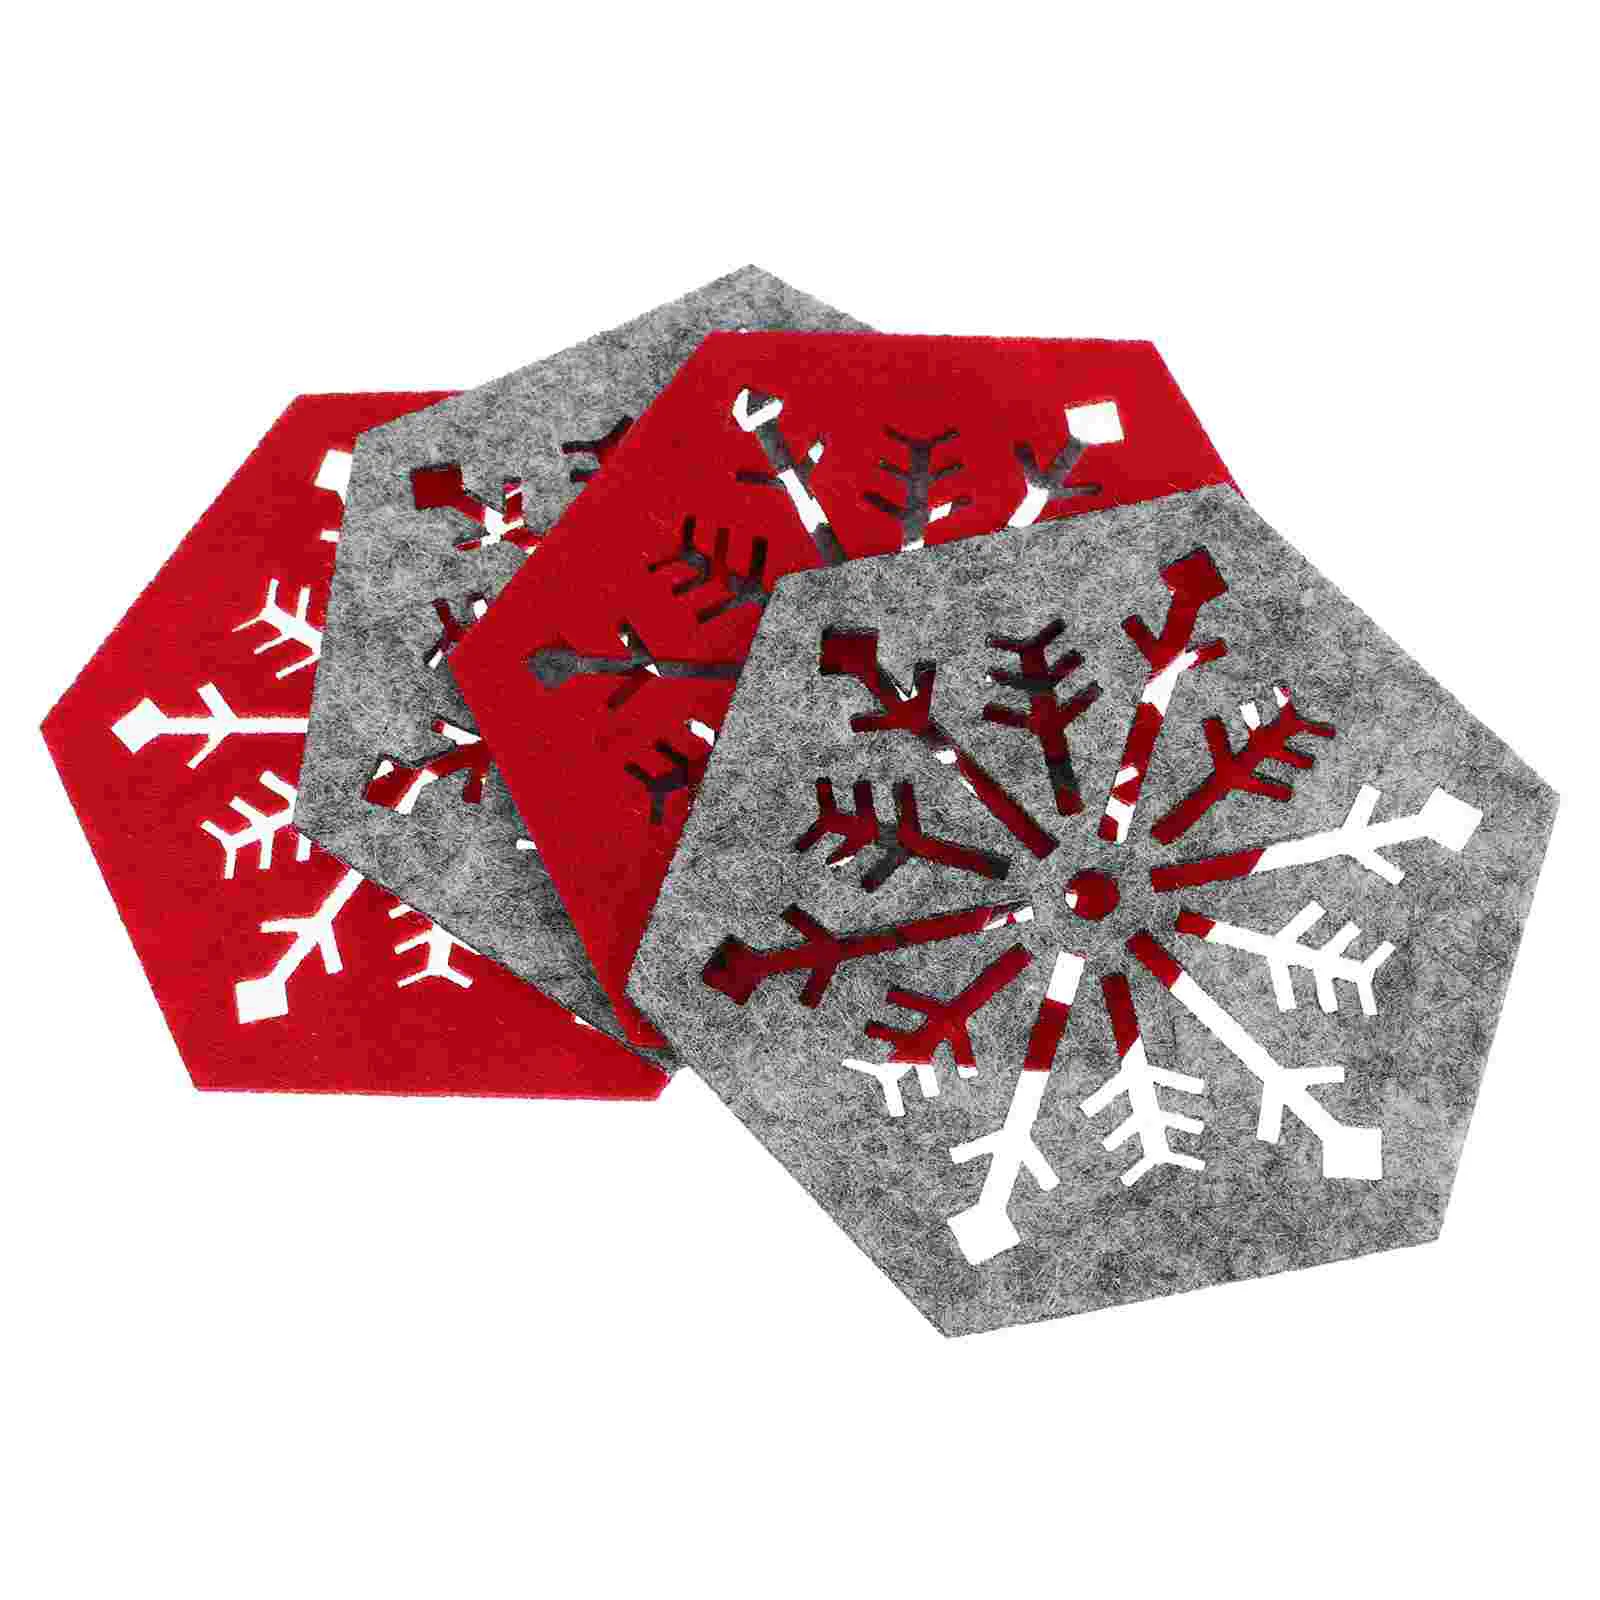 

4 Pcs Christmas Hexagon Snowflake Coaster Placemat Cloth Dinner Table Mats for Drinks Anti-skid Placemats Themed Home Decor Cup